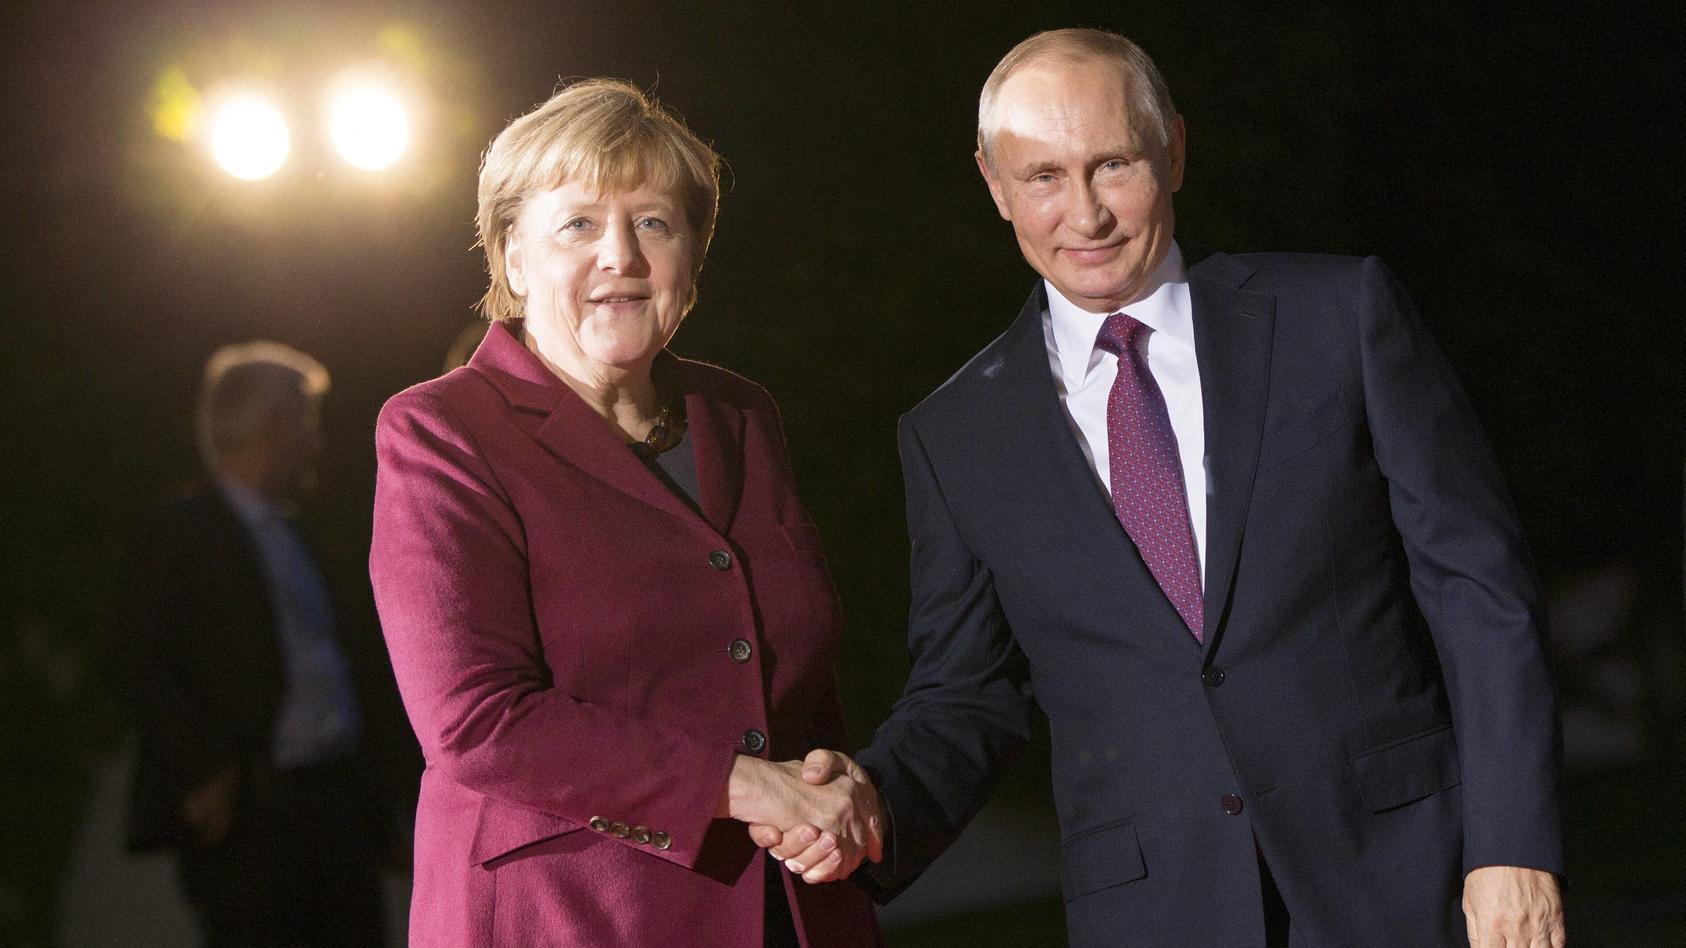 October 19, 2016 - Berlin, Germany - German Chancellor Angela Merkel and Russian President Vladimir Putin pose for the photographers upon his arrival at the Chancellery in Berlin, Germany on October 19, 2016. German Chancellor Angela Merkel is meetin